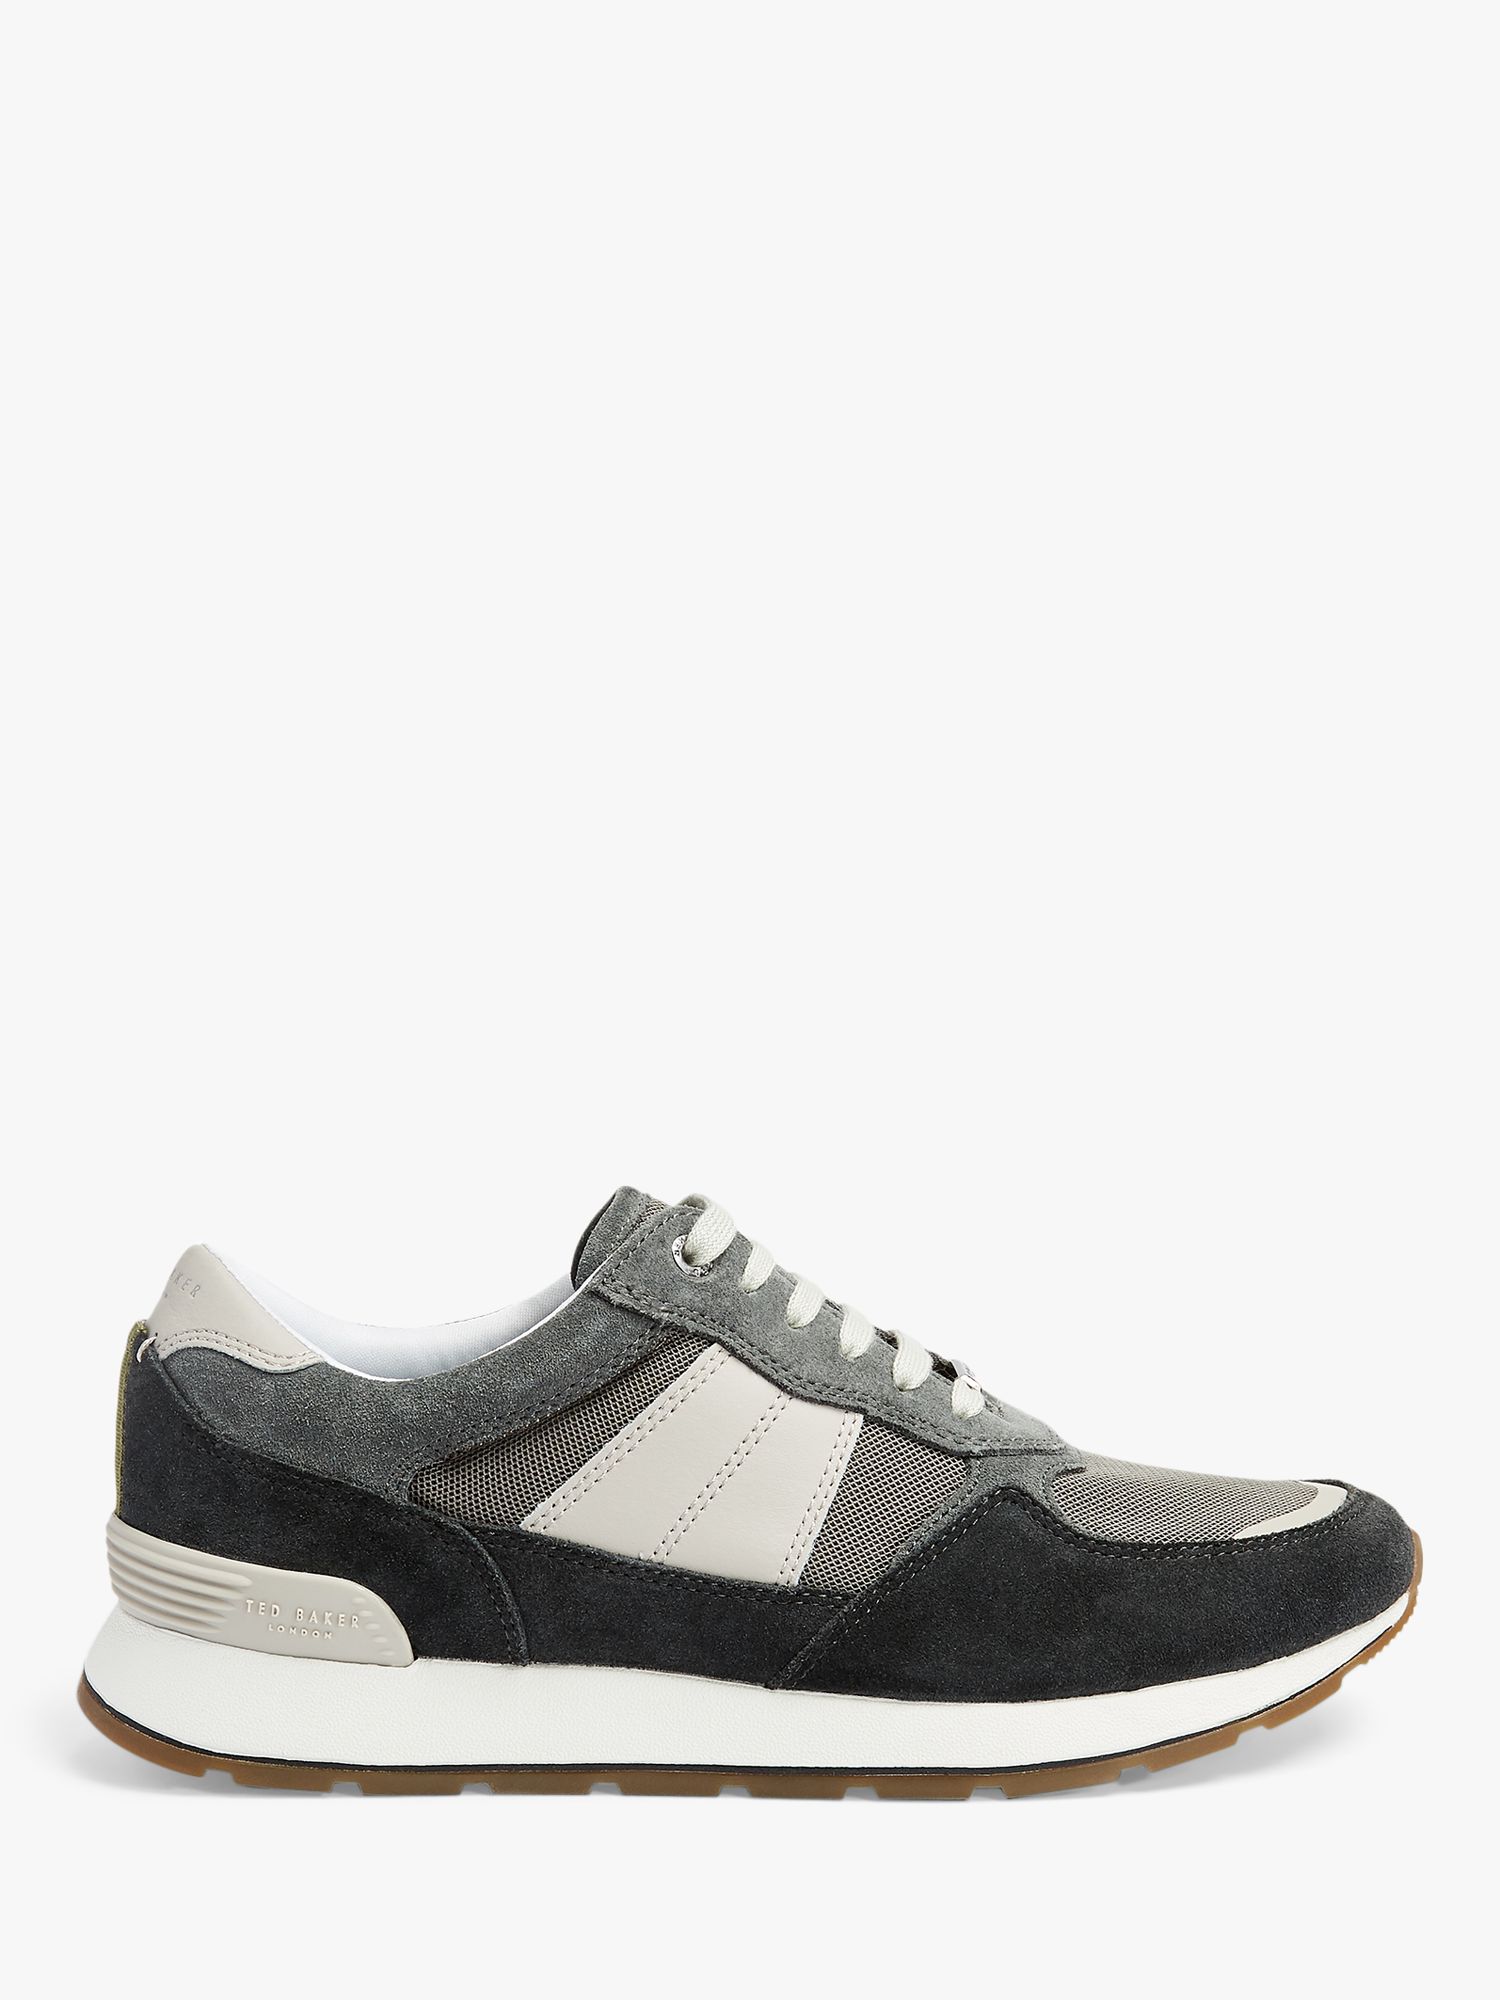 Ted Baker RACOR Leather Tonal Trainers, Grey, 12